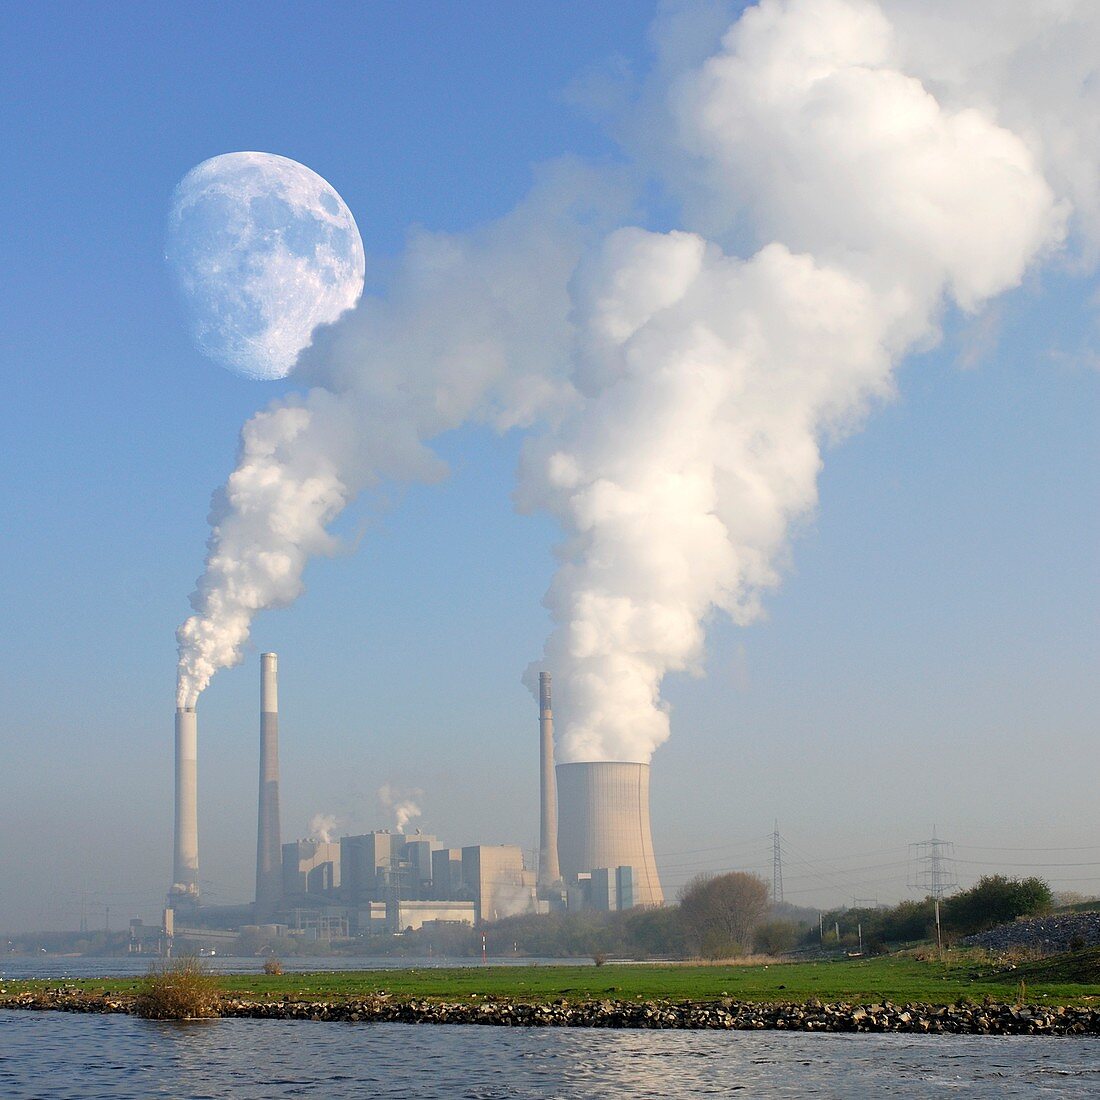 Moon over power station